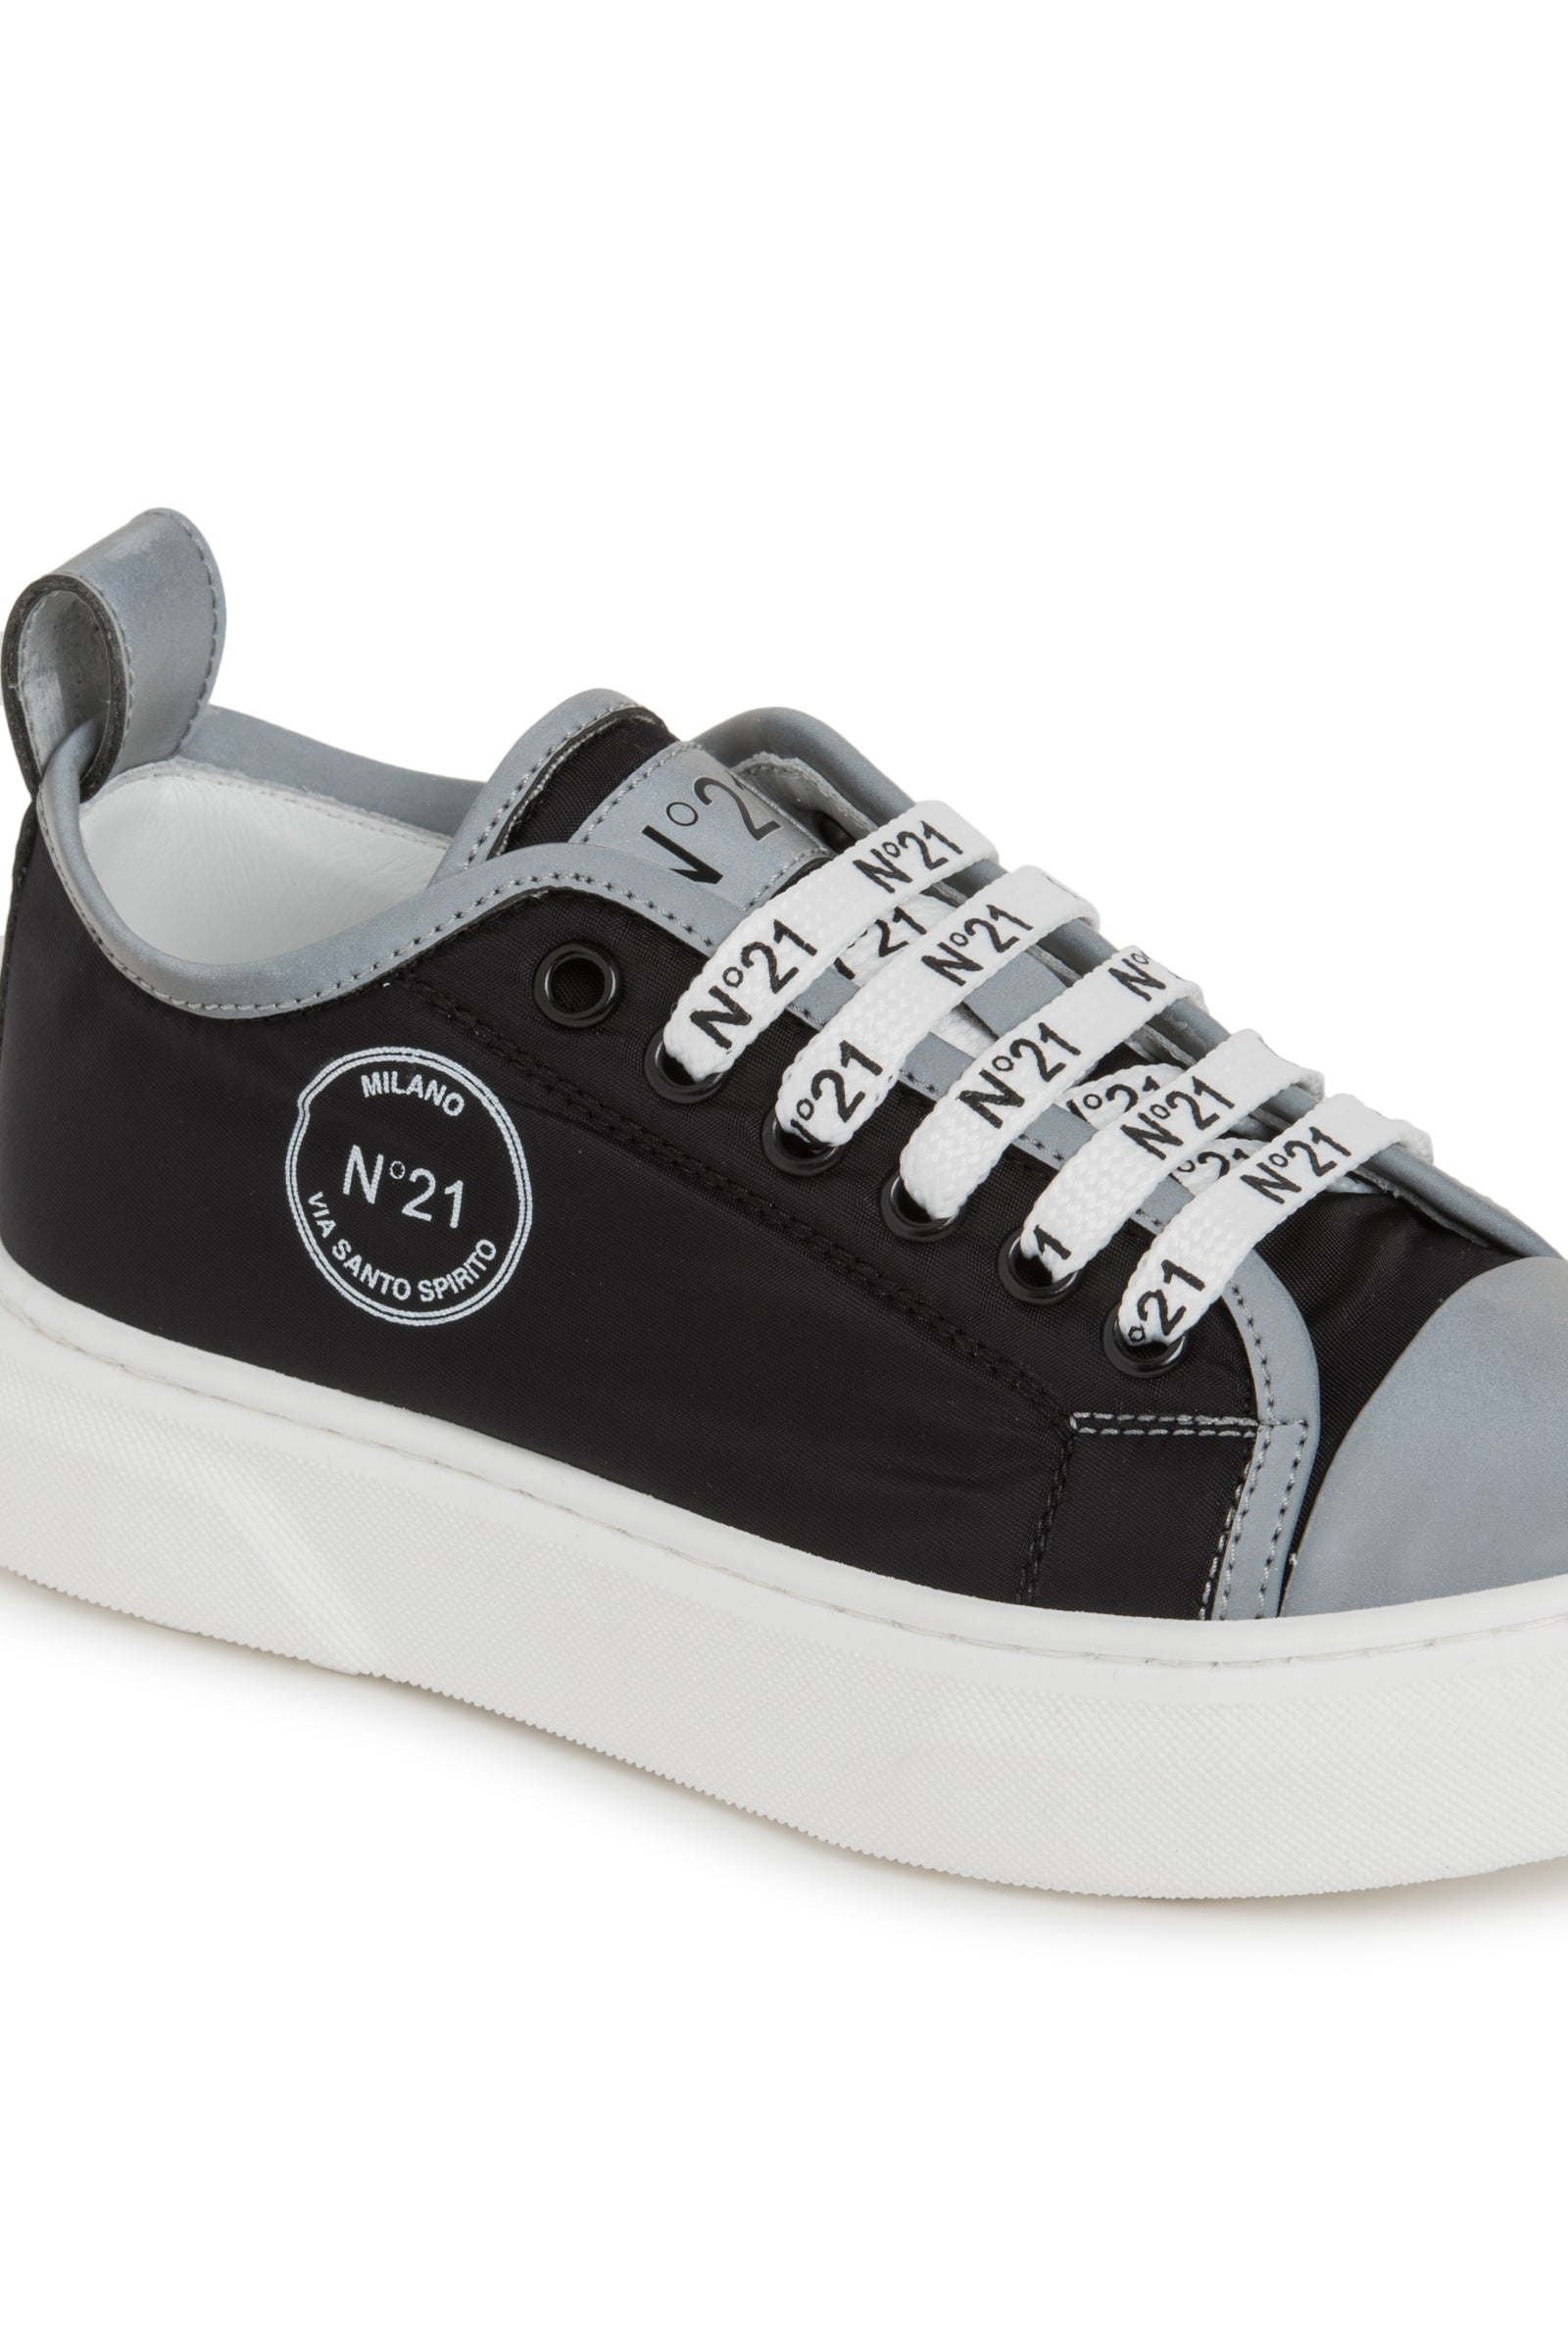 Leather Sneakers With Rubberized Sole And Toe